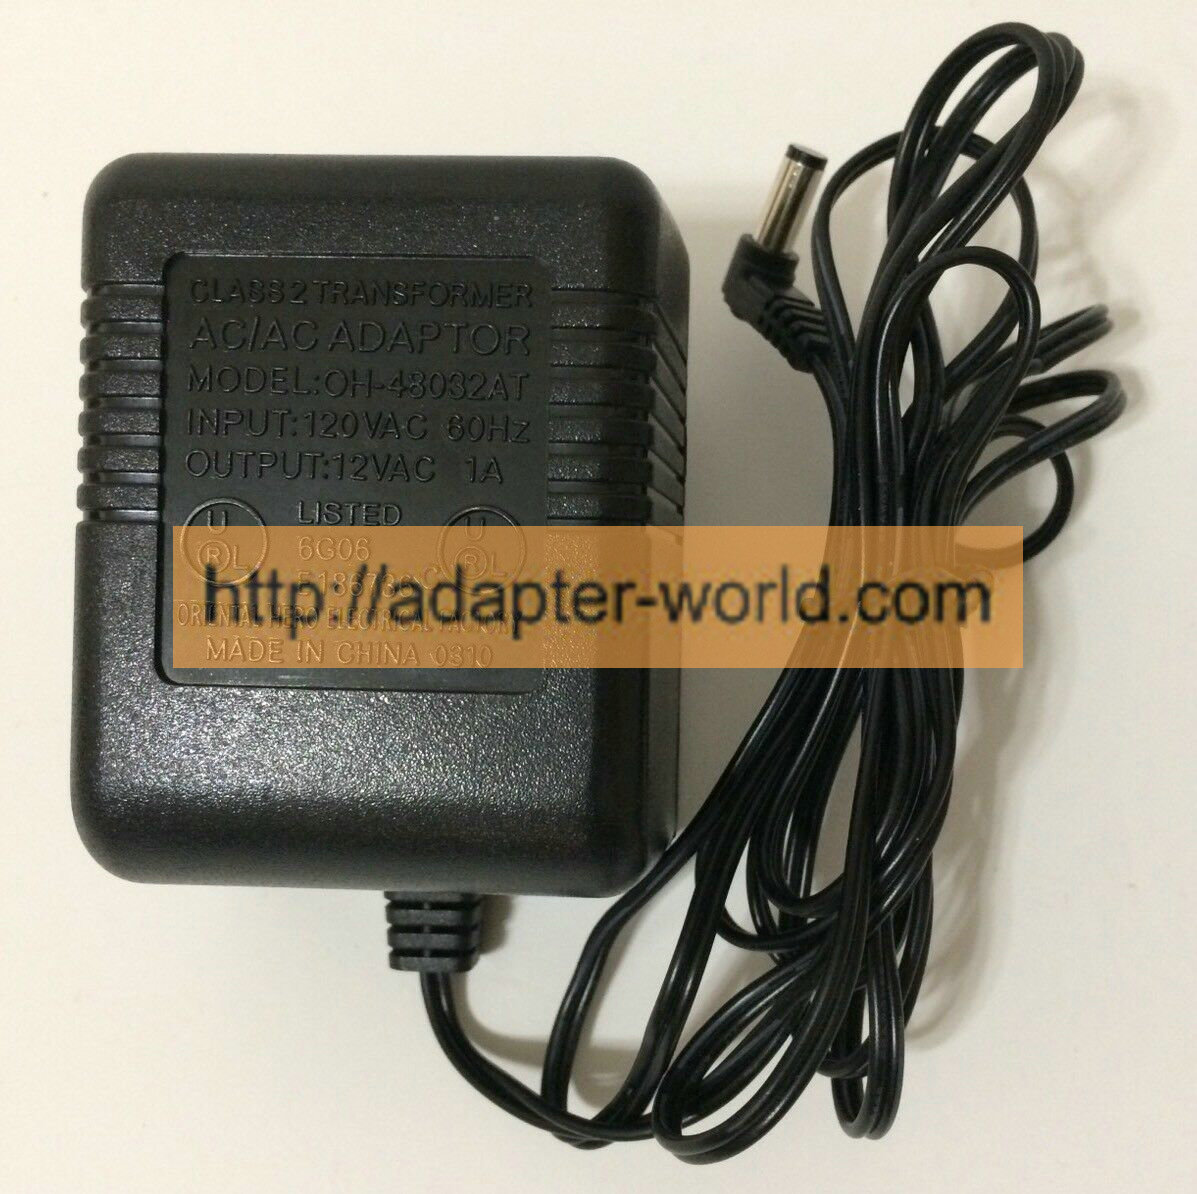 *100% Brand NEW* Oriental Hero Electrical Factory Adapter 120V OH-48032AT 12VAC 1A AC/AC Adaptor